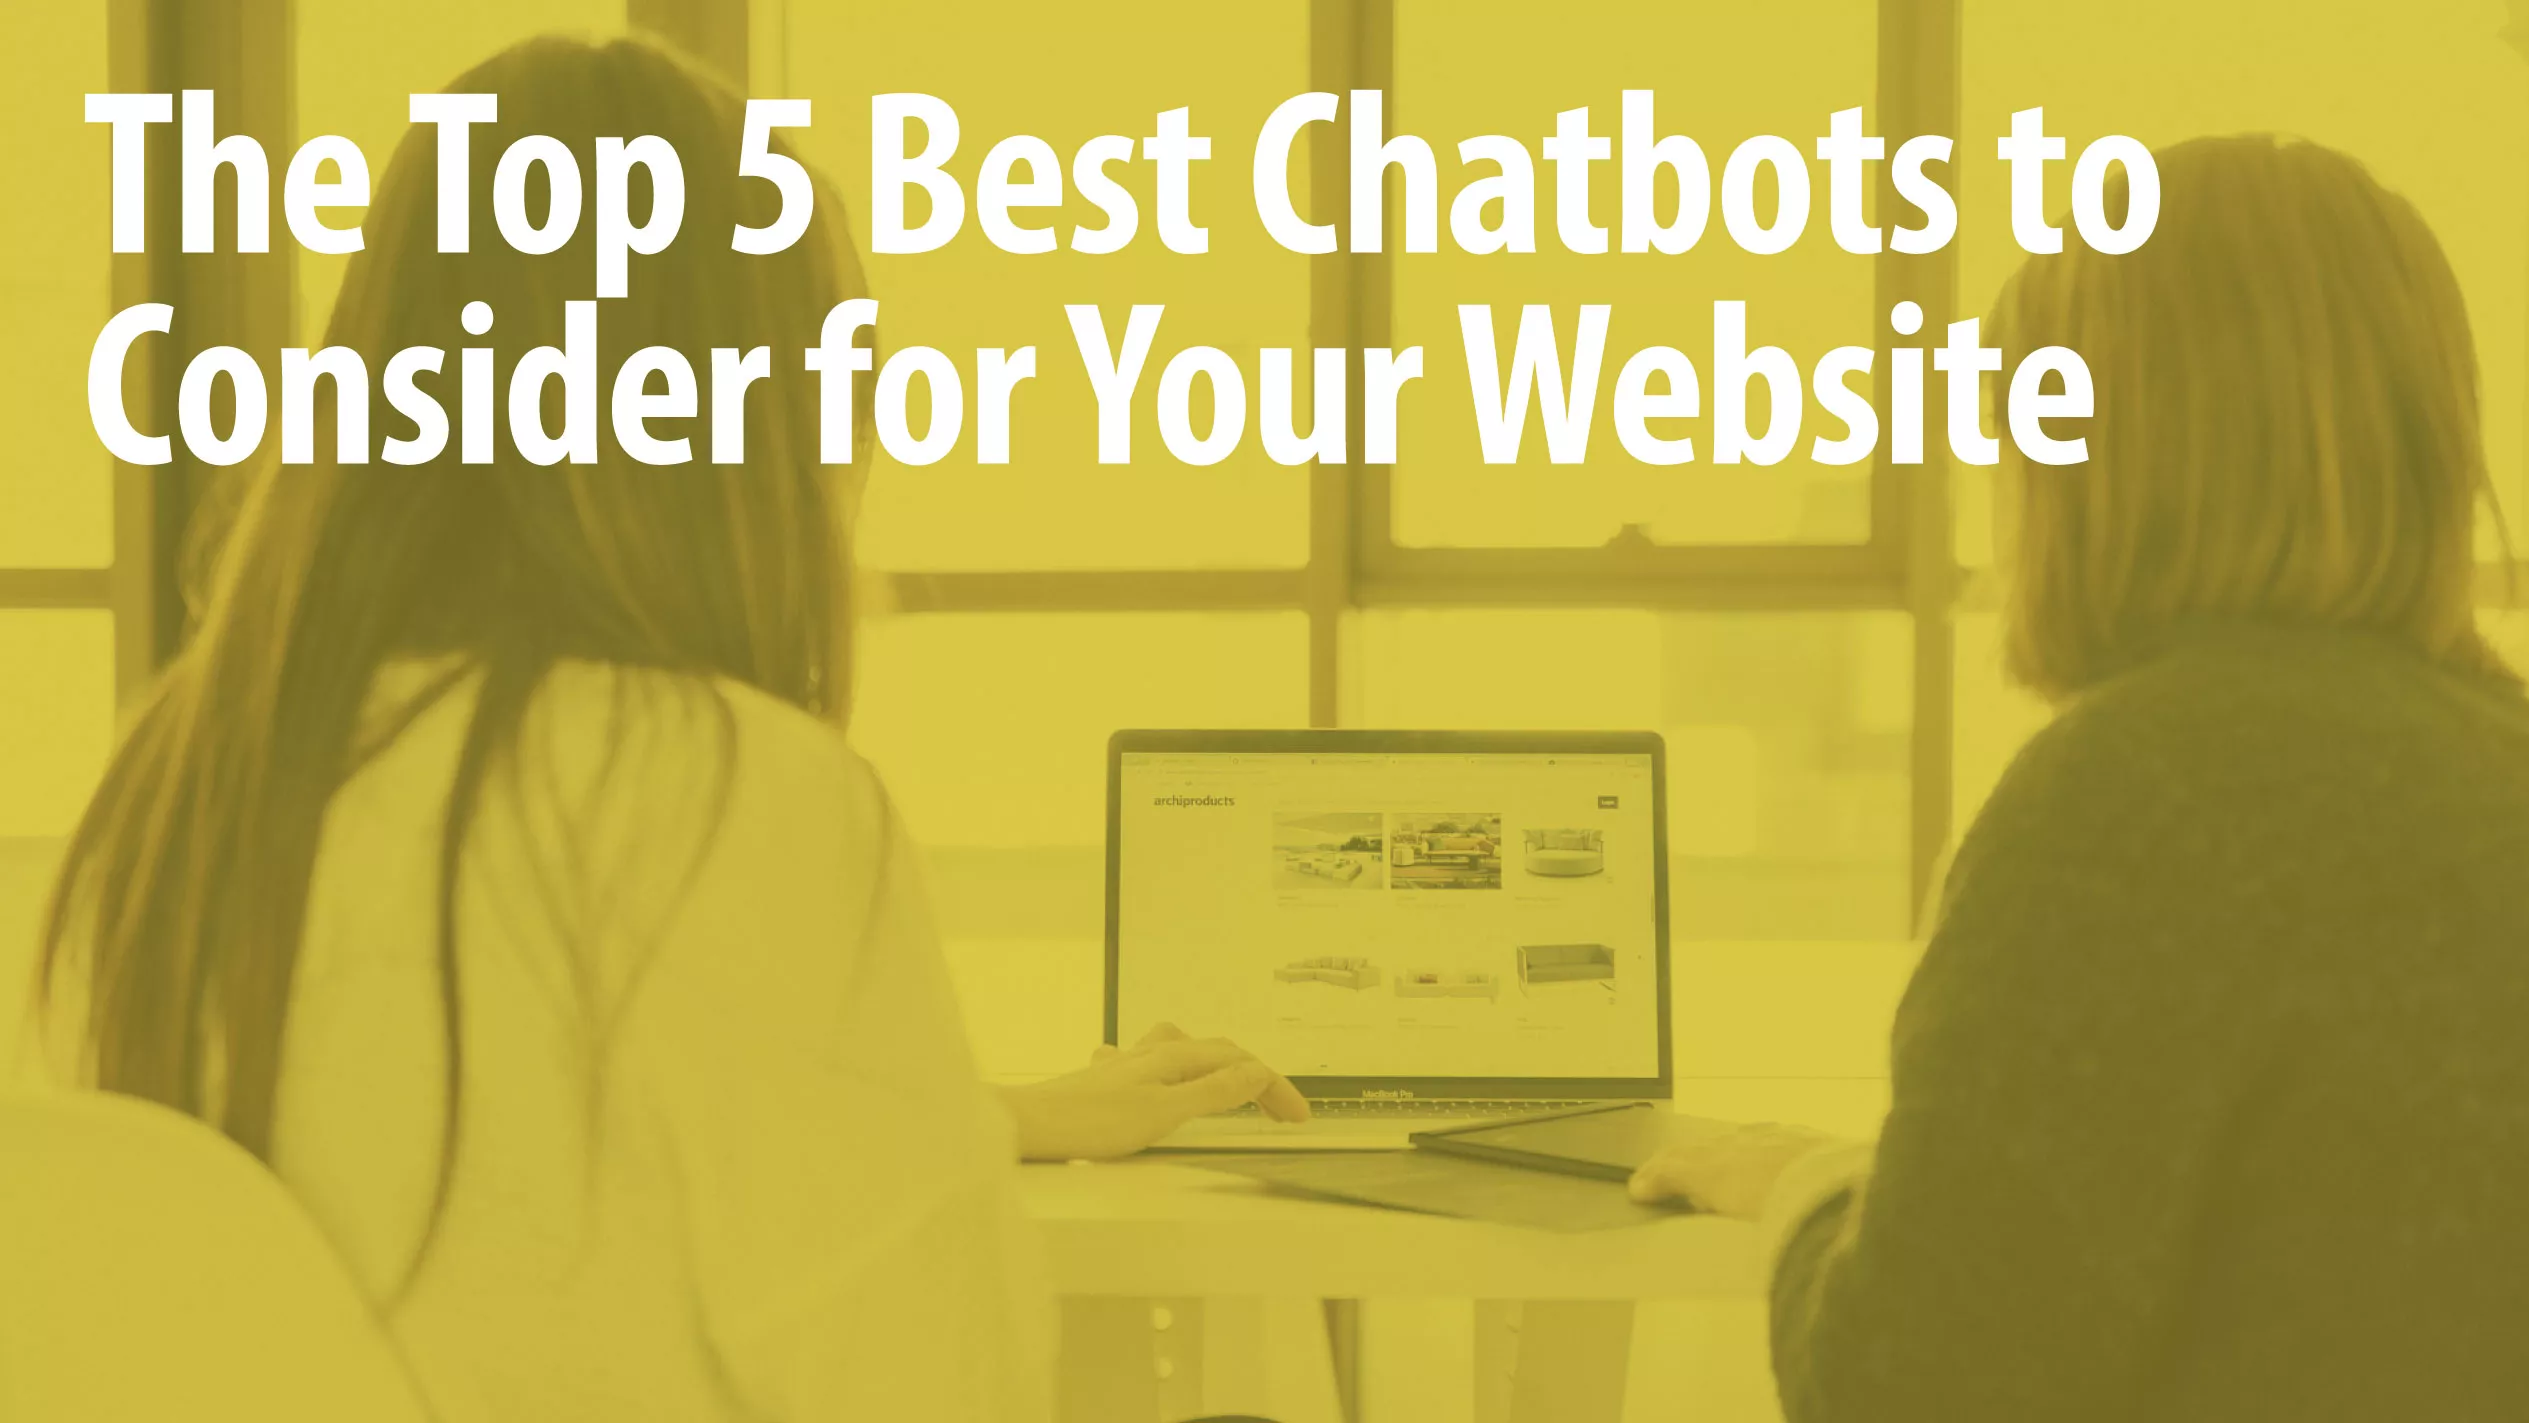 Chatbot Services Article Header